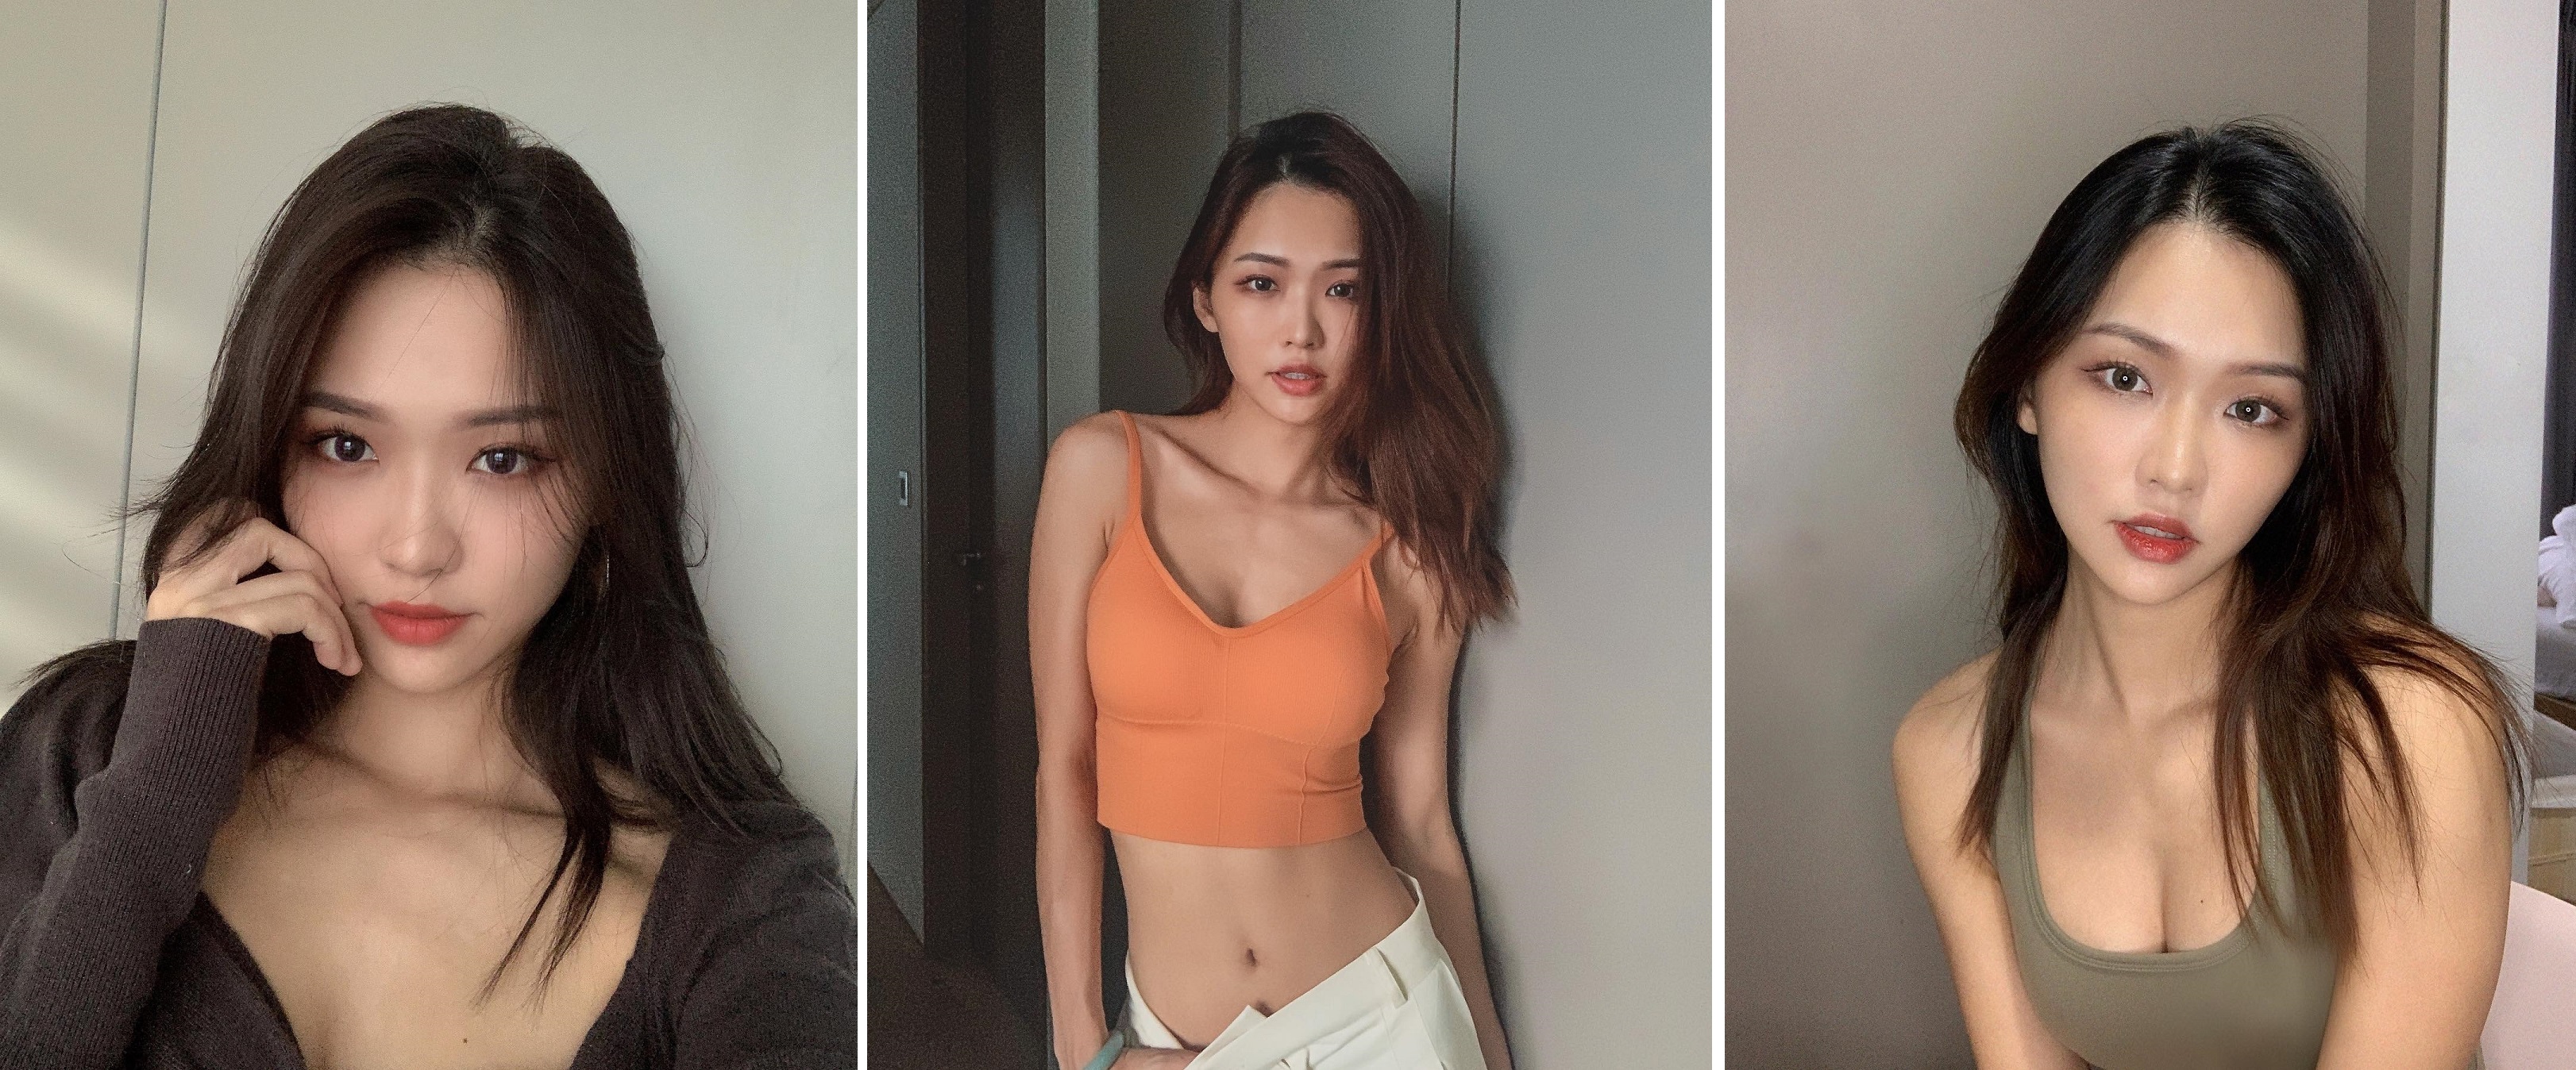 Instagram model from Singapore made $7.37 million in 10 days selling NFT photos